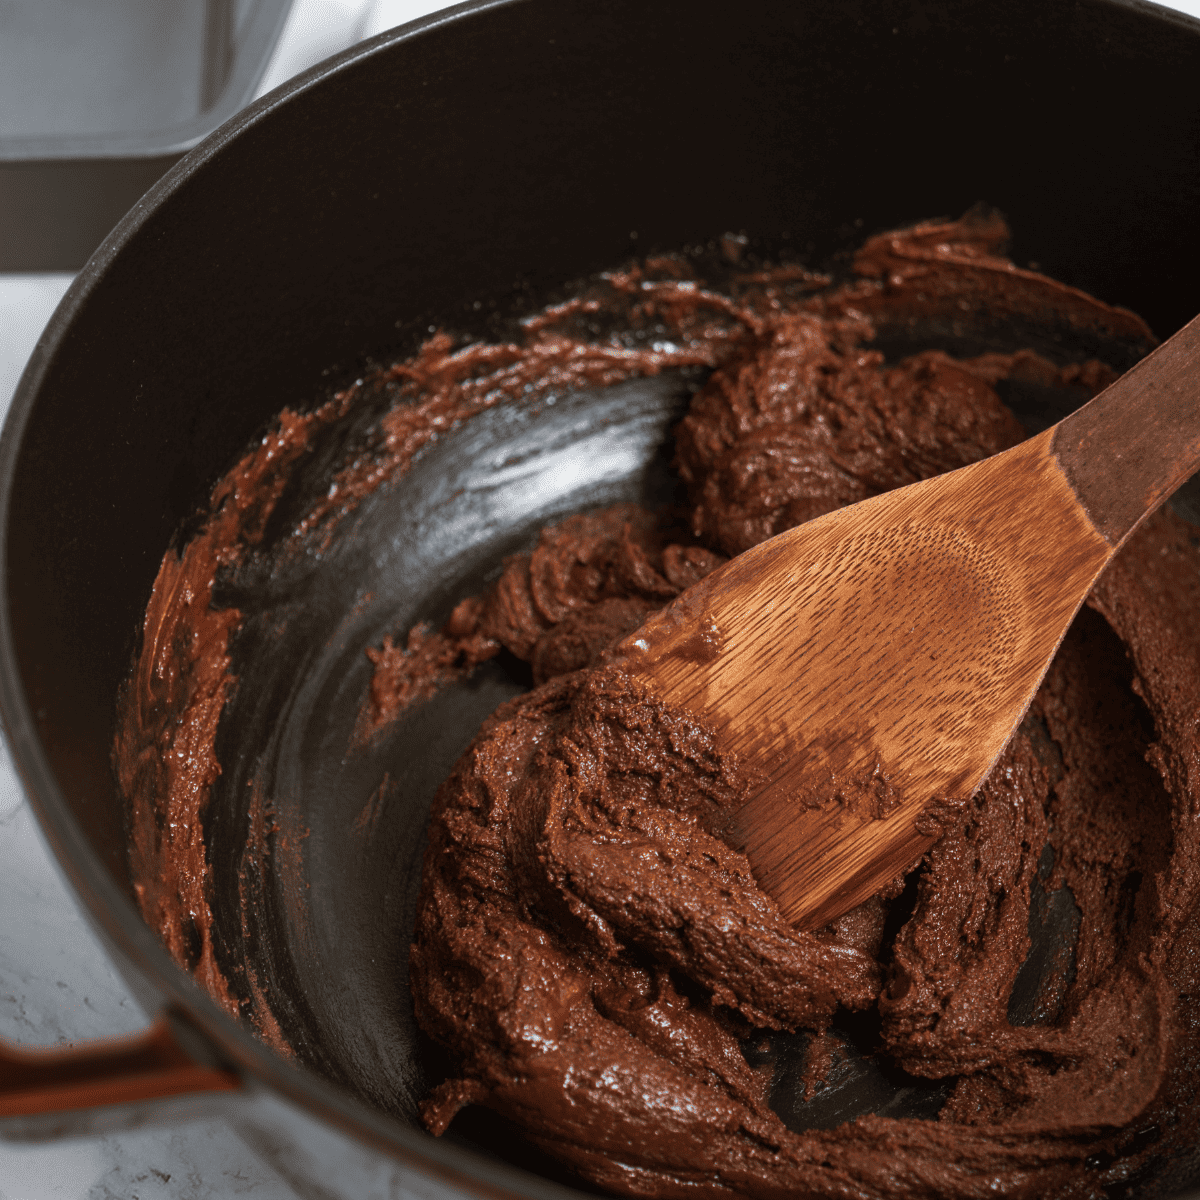 How To Make Trader Joe's Truffle Brownie Mix In Air Fryer